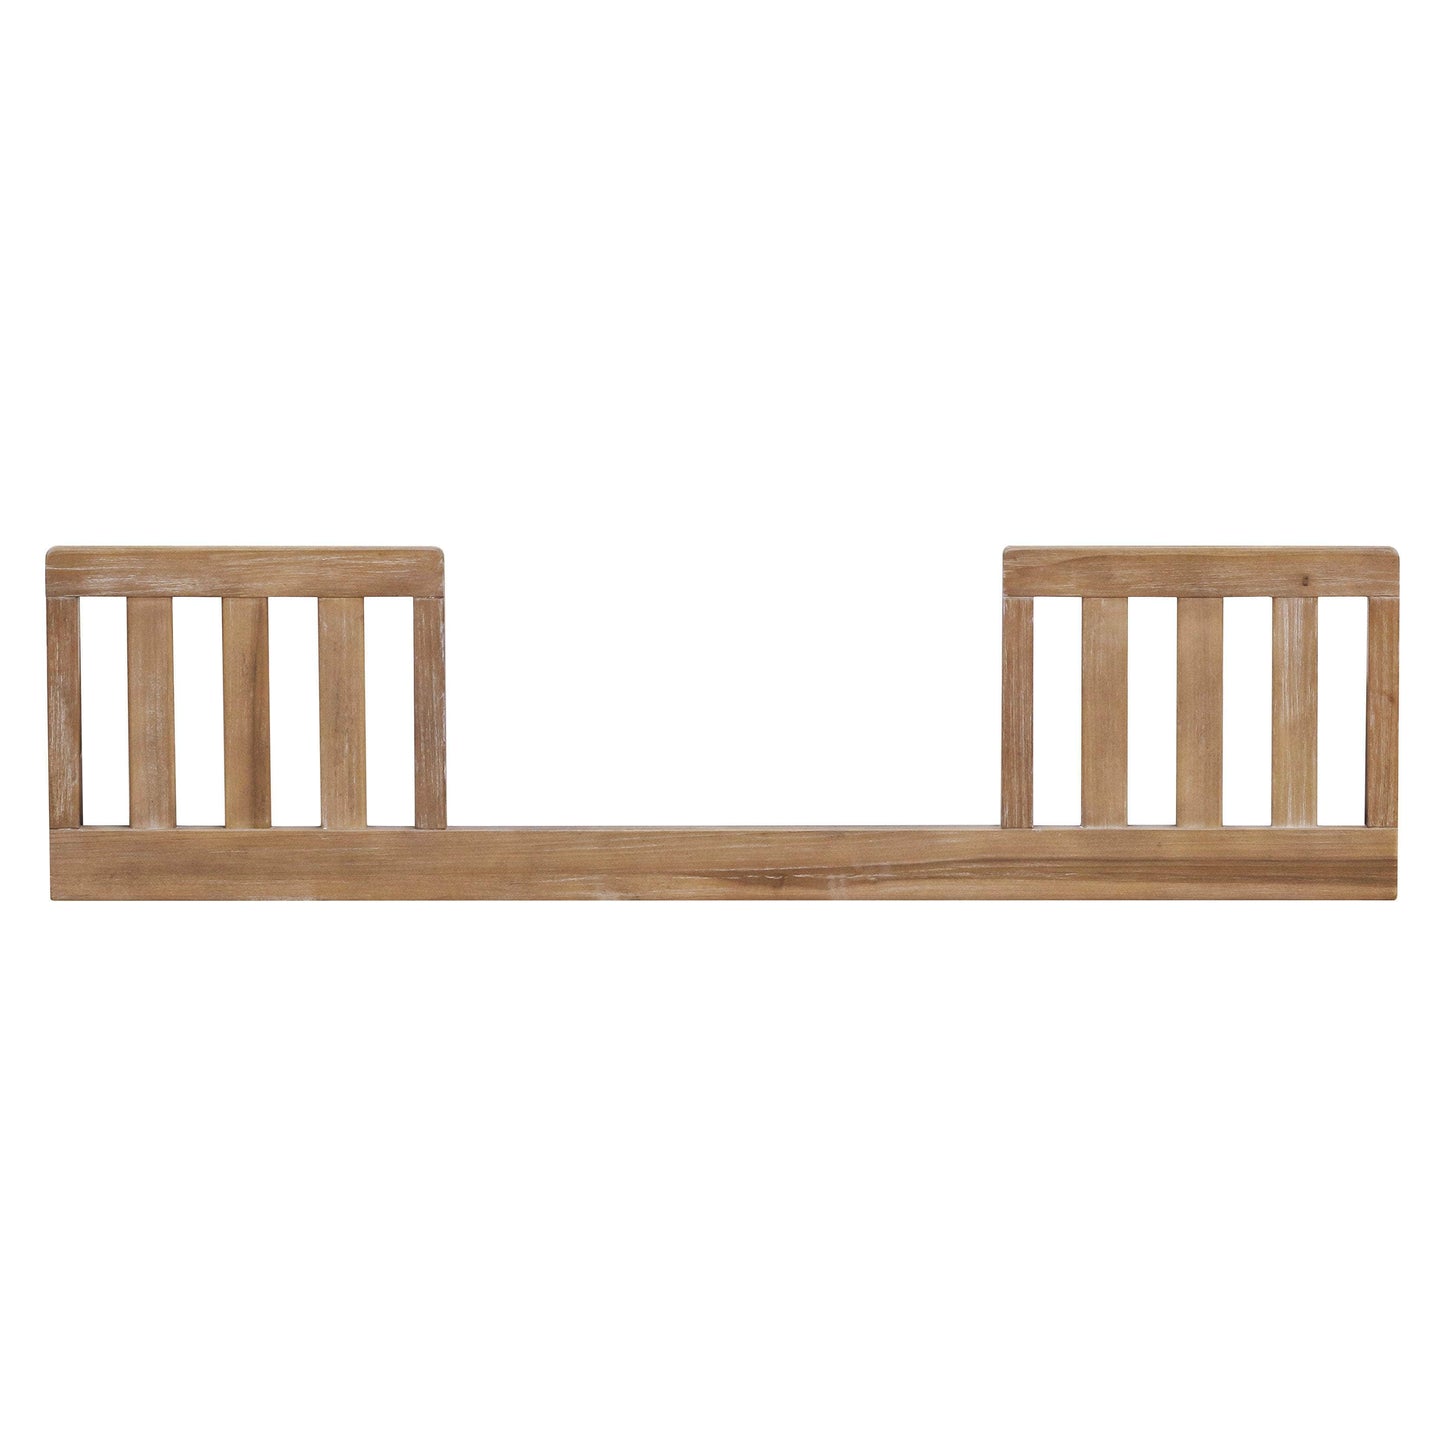 B14599DF,Toddler Bed Conversion Kit in Driftwood